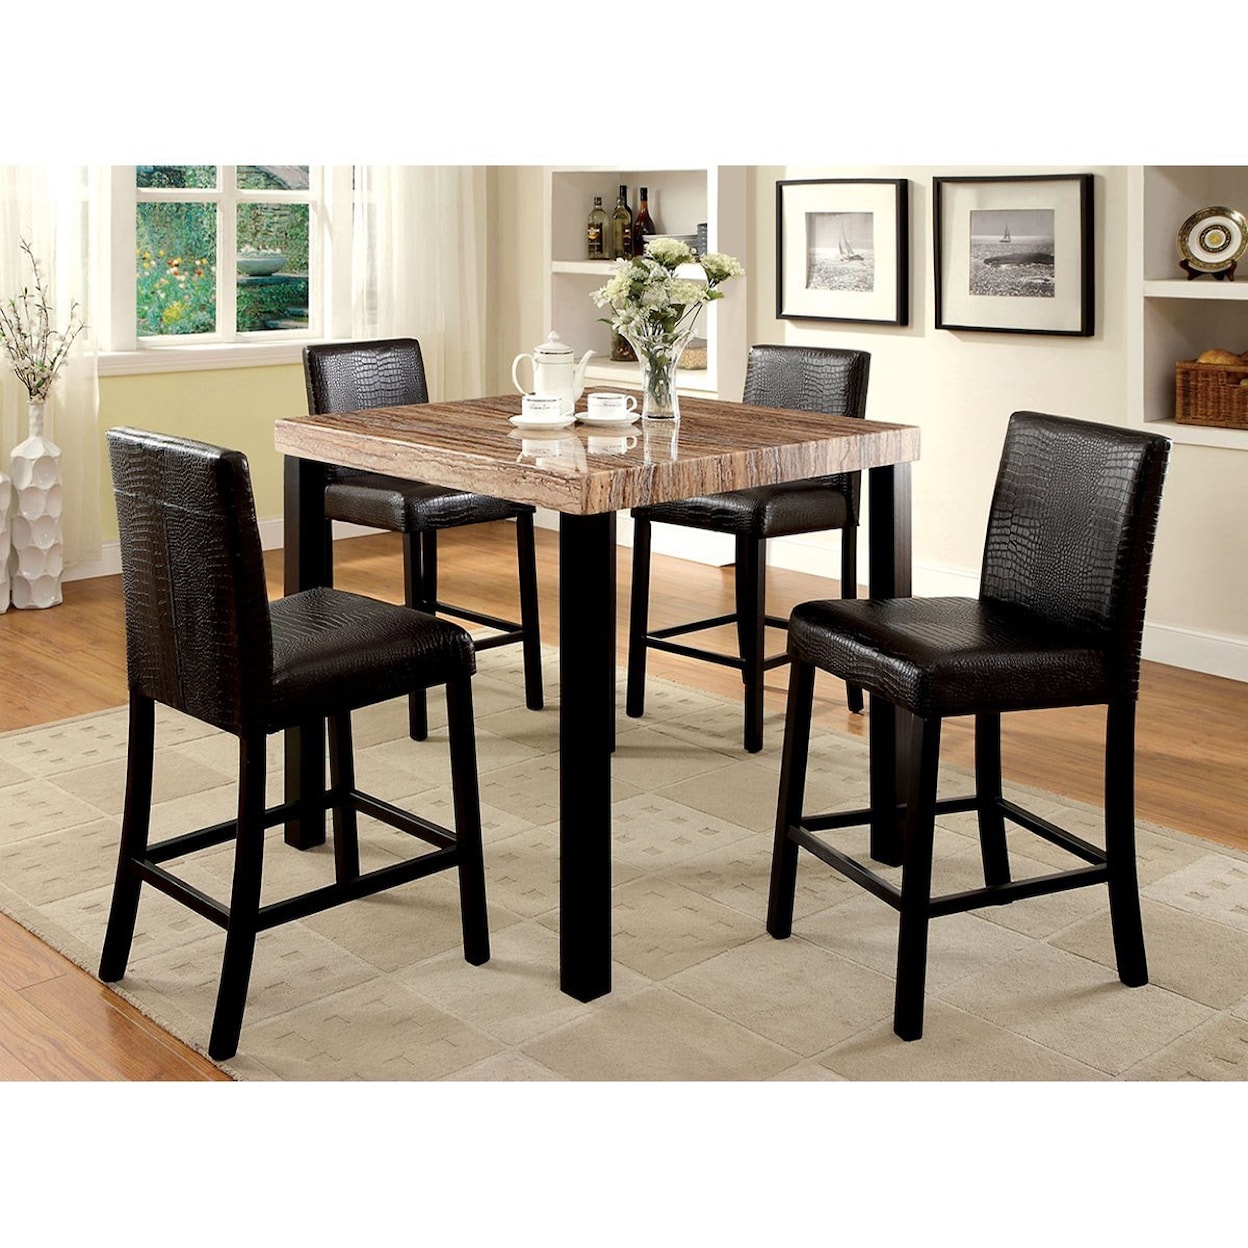 Furniture of America Dimrock Table + 6 Side Chairs